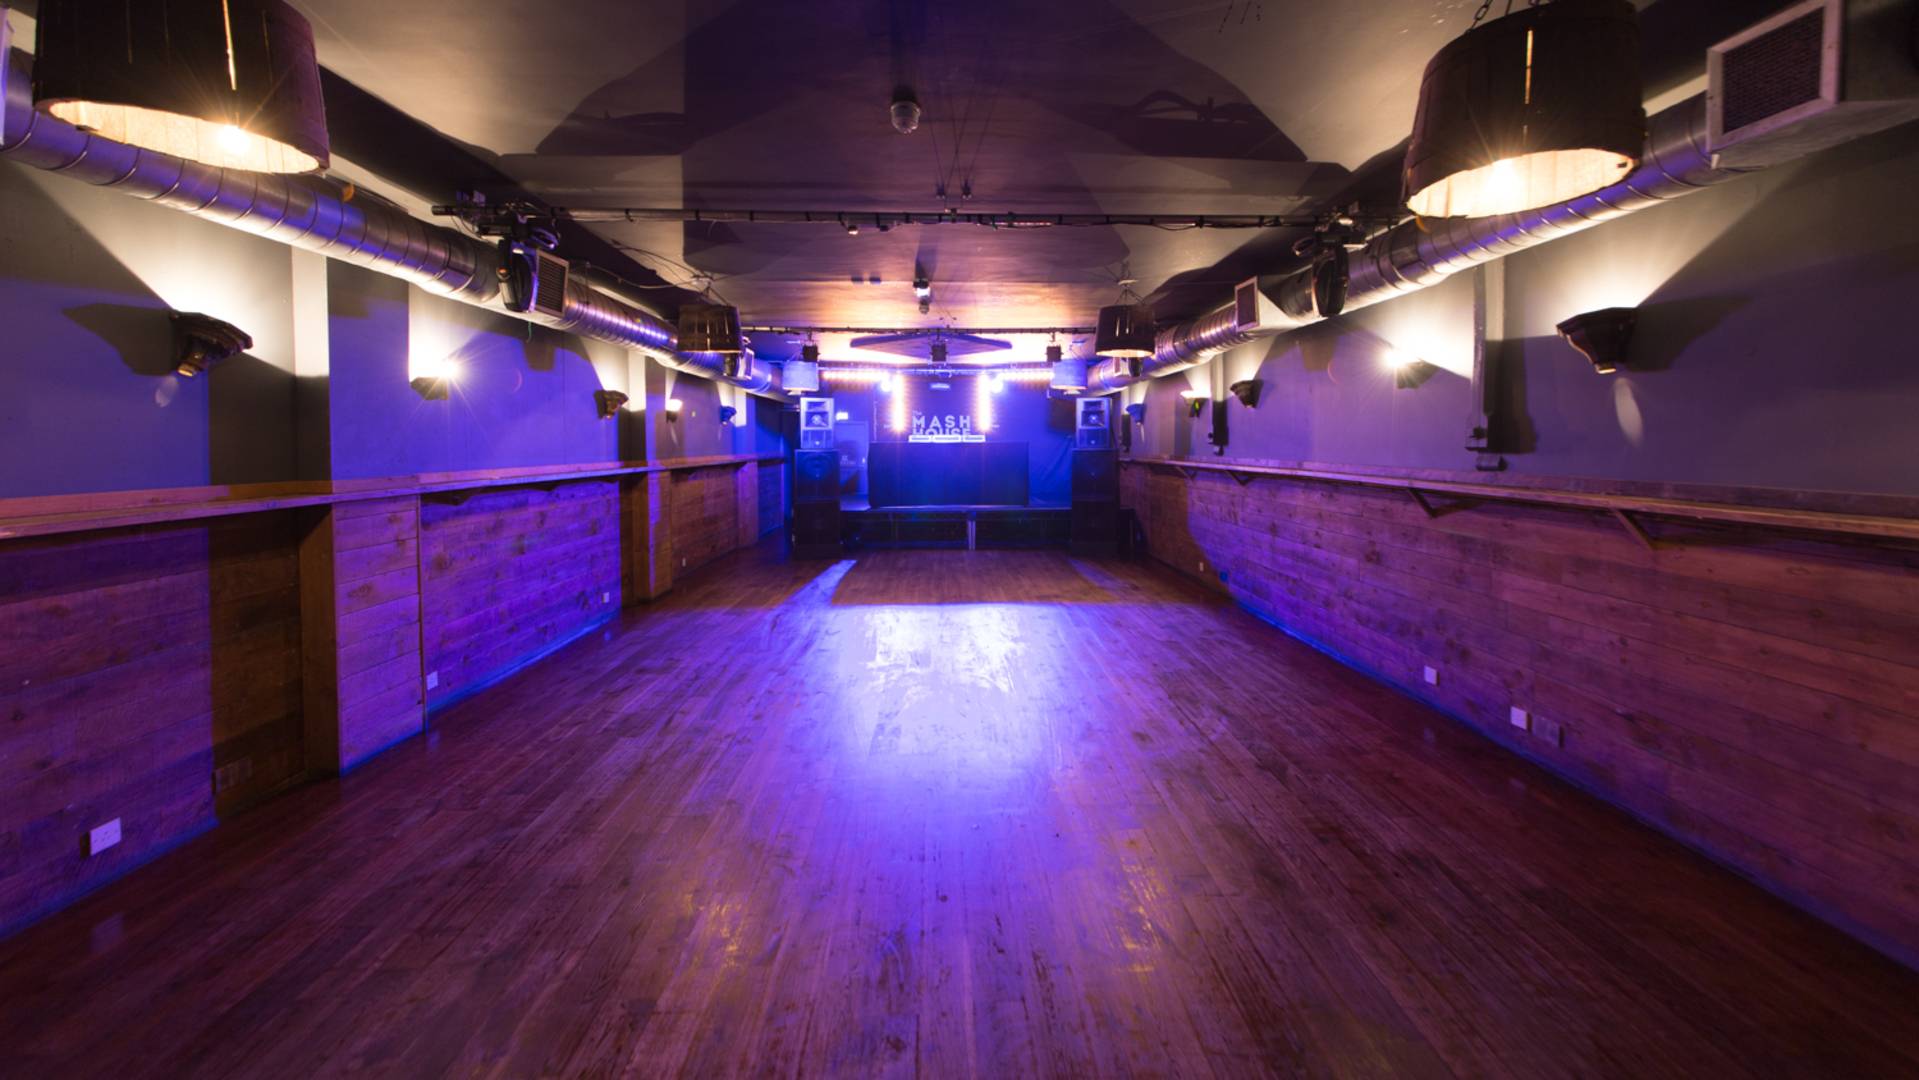 The Mash House, Edinburgh. Main room looking towards stage set up for nightclub, The Mash House